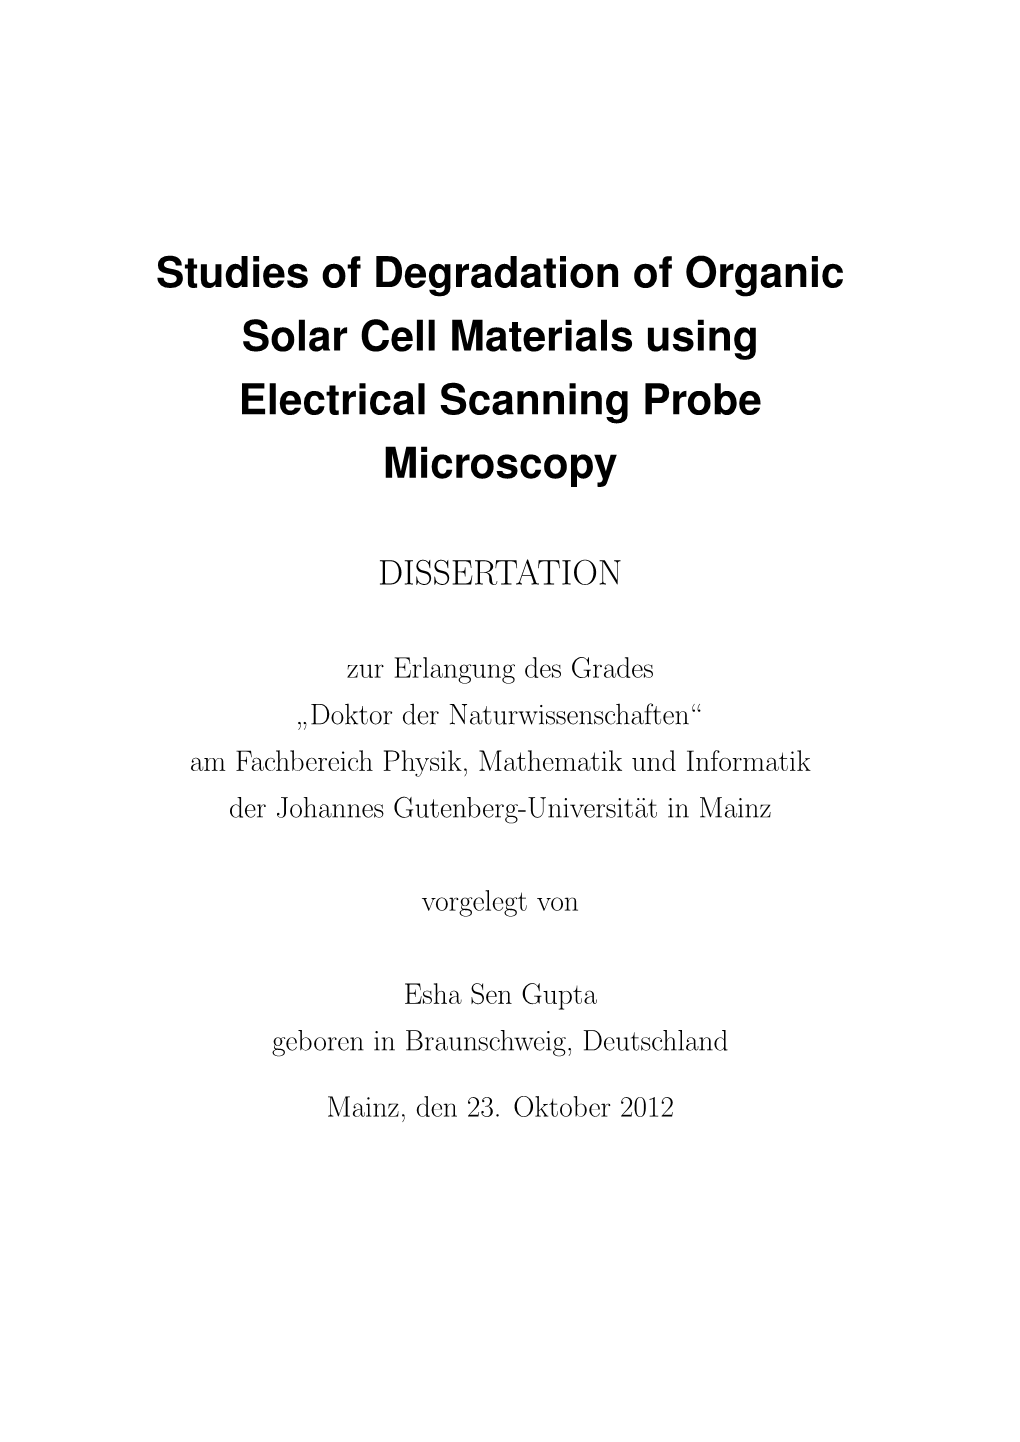 Studies of Degradation of Organic Solar Cell Materials Using Electrical Scanning Probe Microscopy